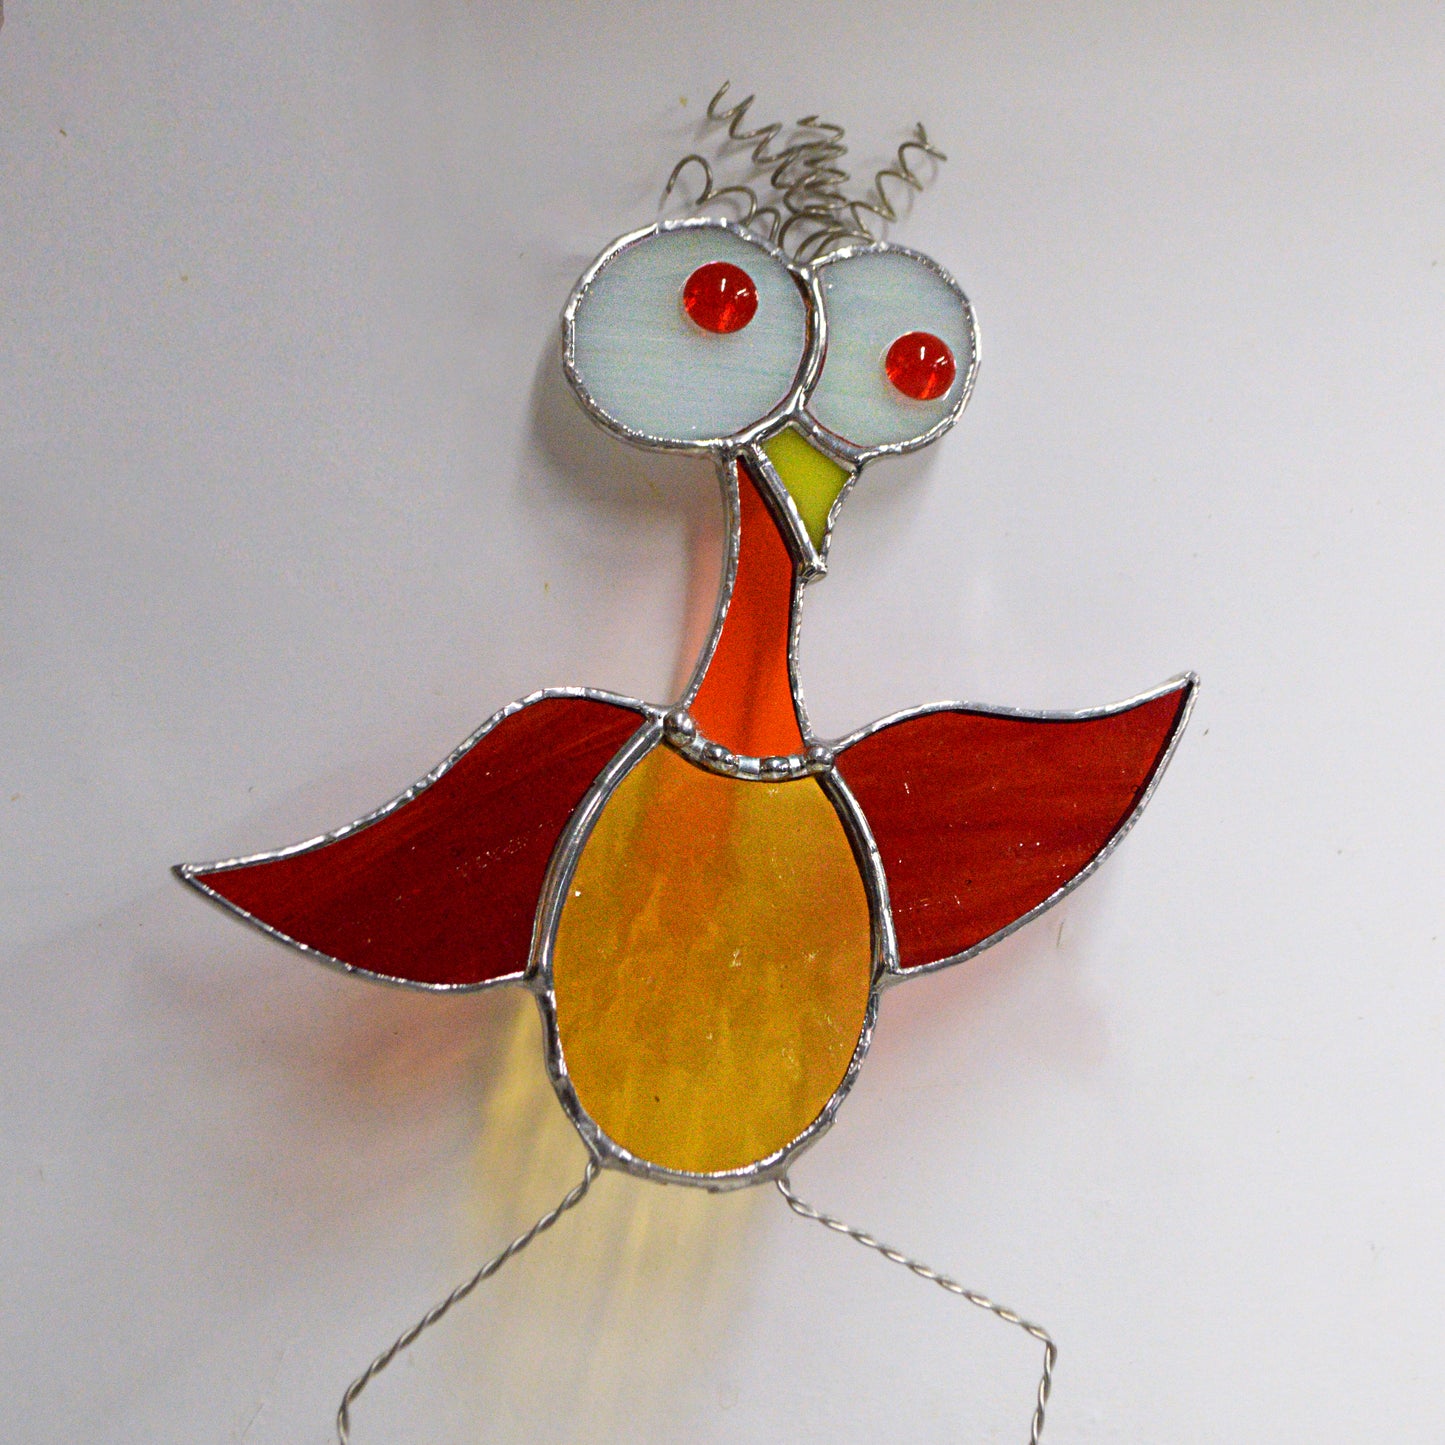 This adorable cartoon bird stained glass suncatcher is a great for window decoration, as a gift and more! Hang it up in your window to see the full beauty of the stained glass, add it to a floral arraignment, or use it as a gift for the nature lover in your life.   All stained glass is handmade by Deb's Broken glass in Bathurst NB